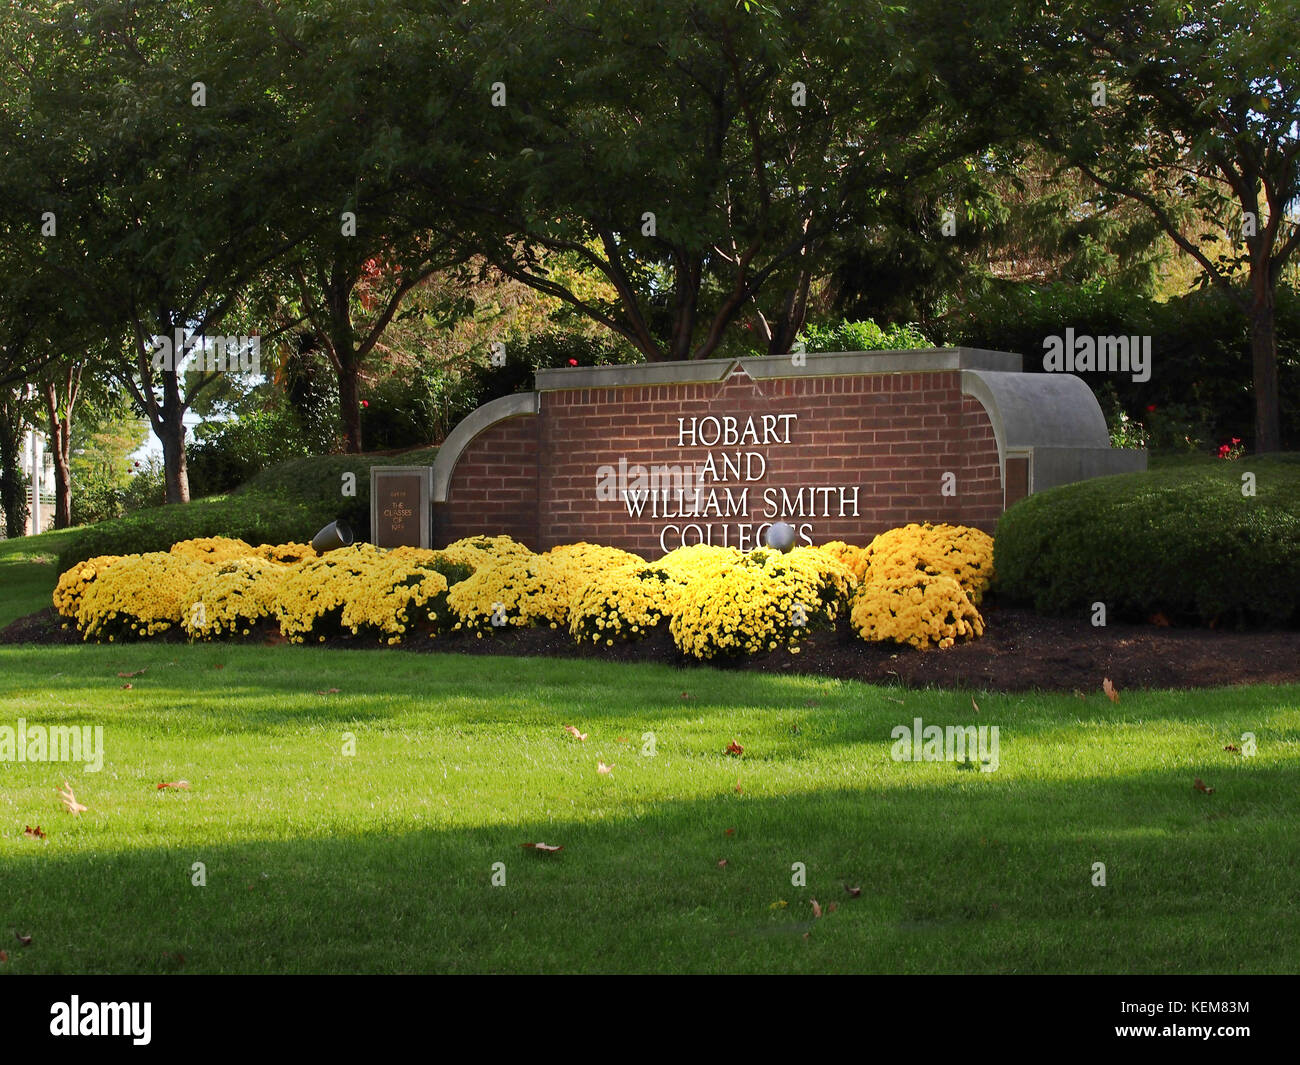 Geneva, New York, USA. October 21, 2017. The entrance sign to Hobart and William Smith Colleges in Geneva, New York Stock Photo